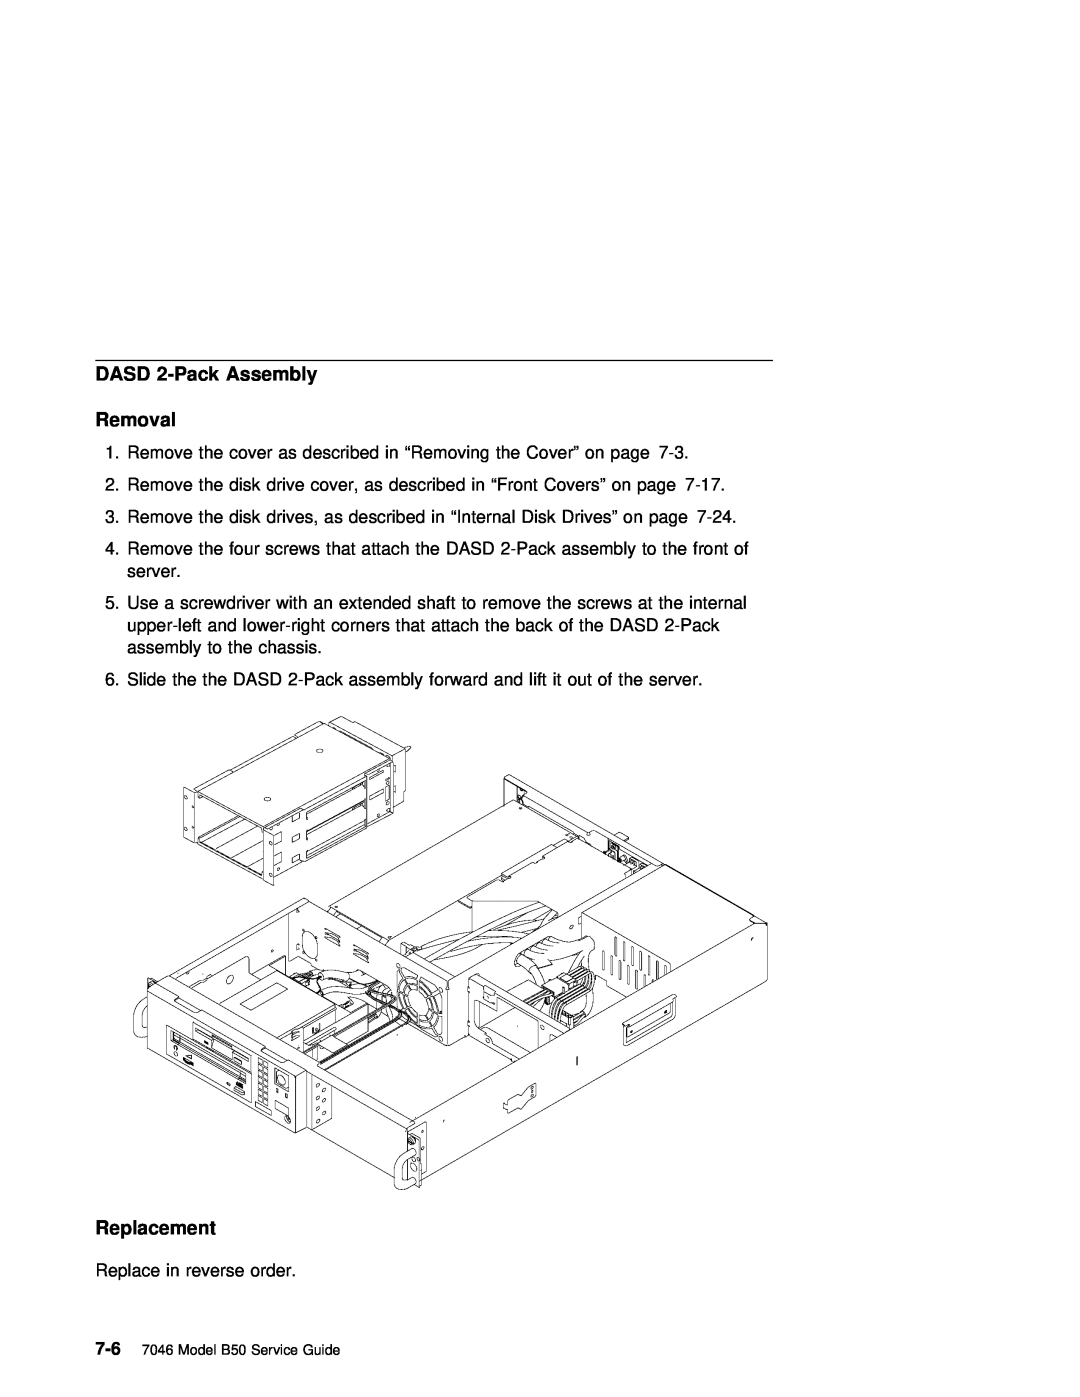 IBM manual DASD 2-Pack Assembly Removal, Replacement, 7-6 7046 Model B50 Service Guide 